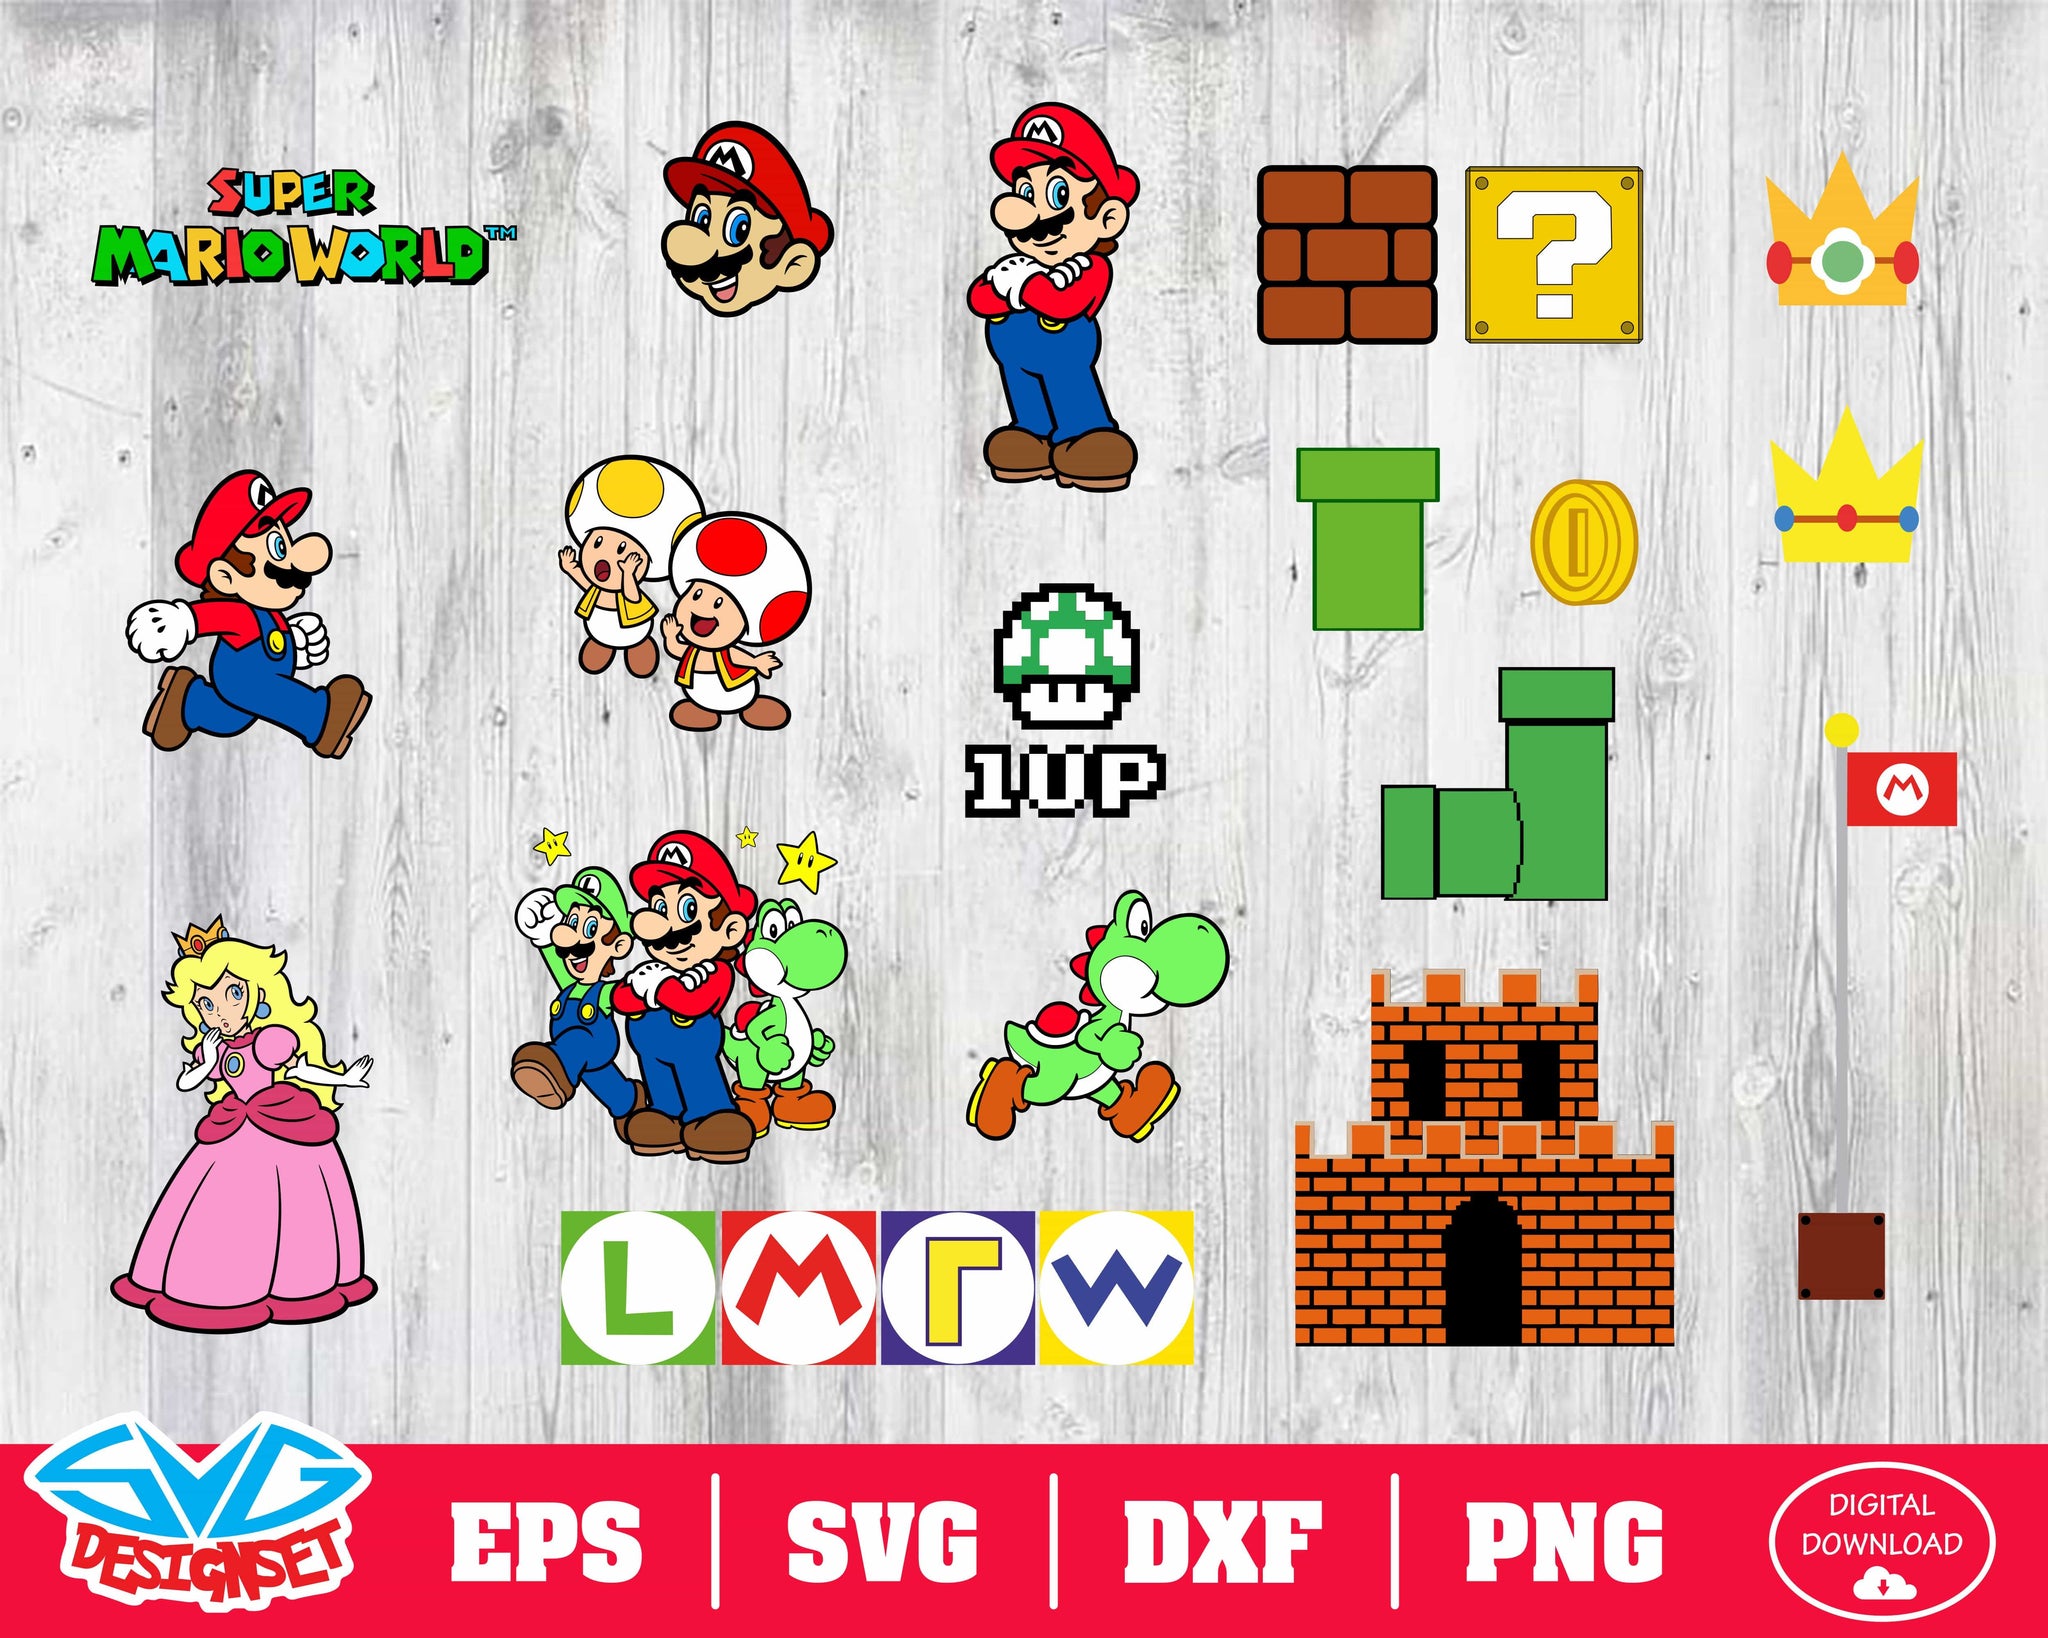 Super Mario Svg, Dxf, Eps, Png, Clipart, Silhouette and Cutfiles #3 - SVGDesignSets